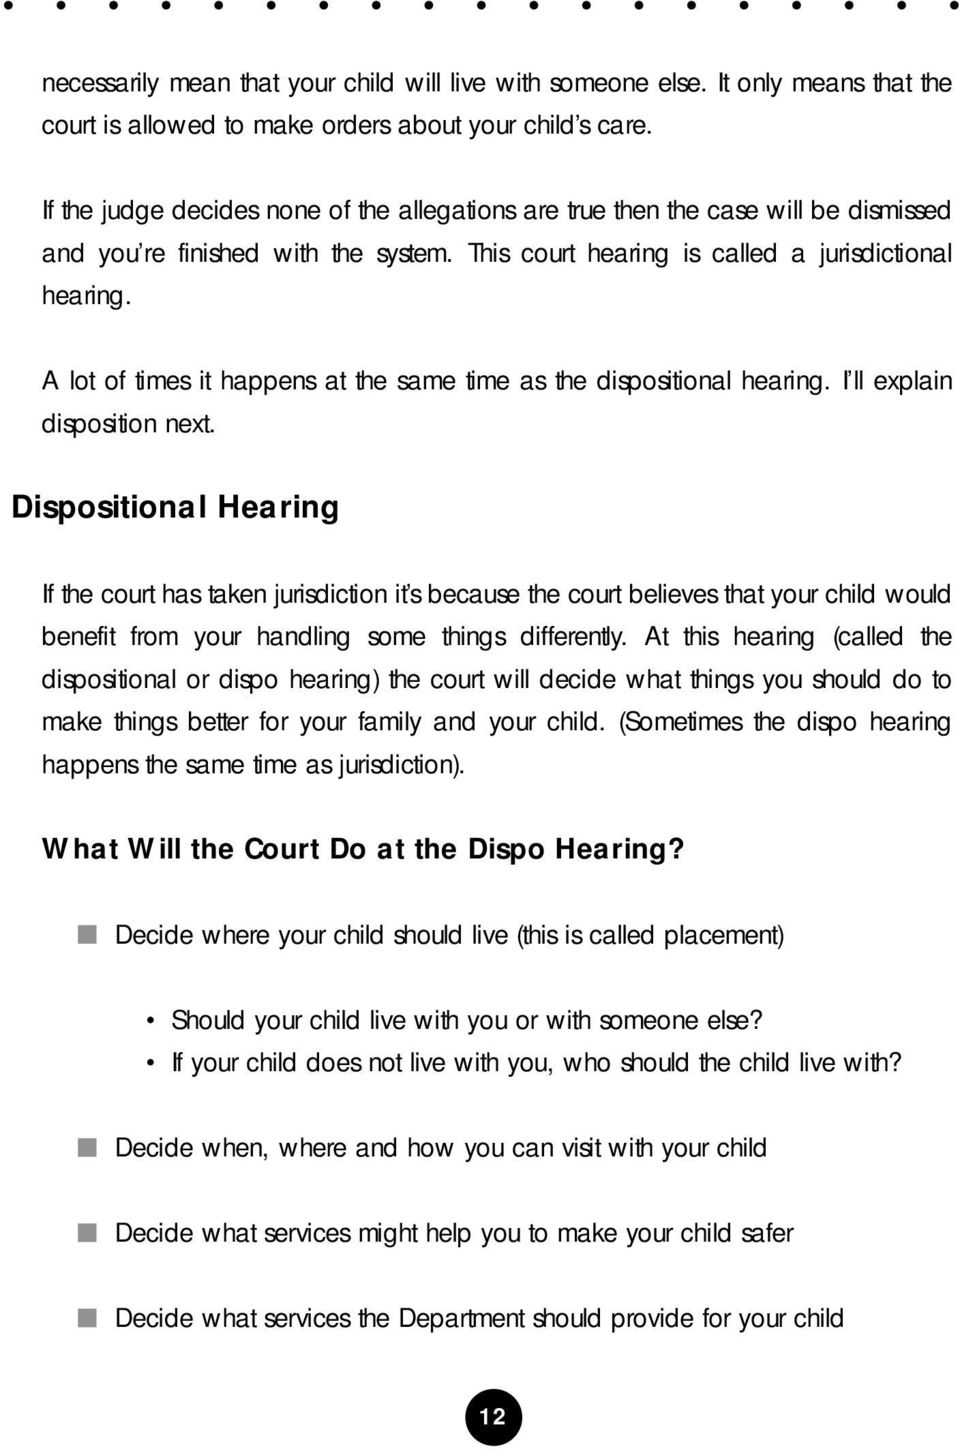 A lot of times it happens at the same time as the dispositional hearing. I ll explain disposition next.